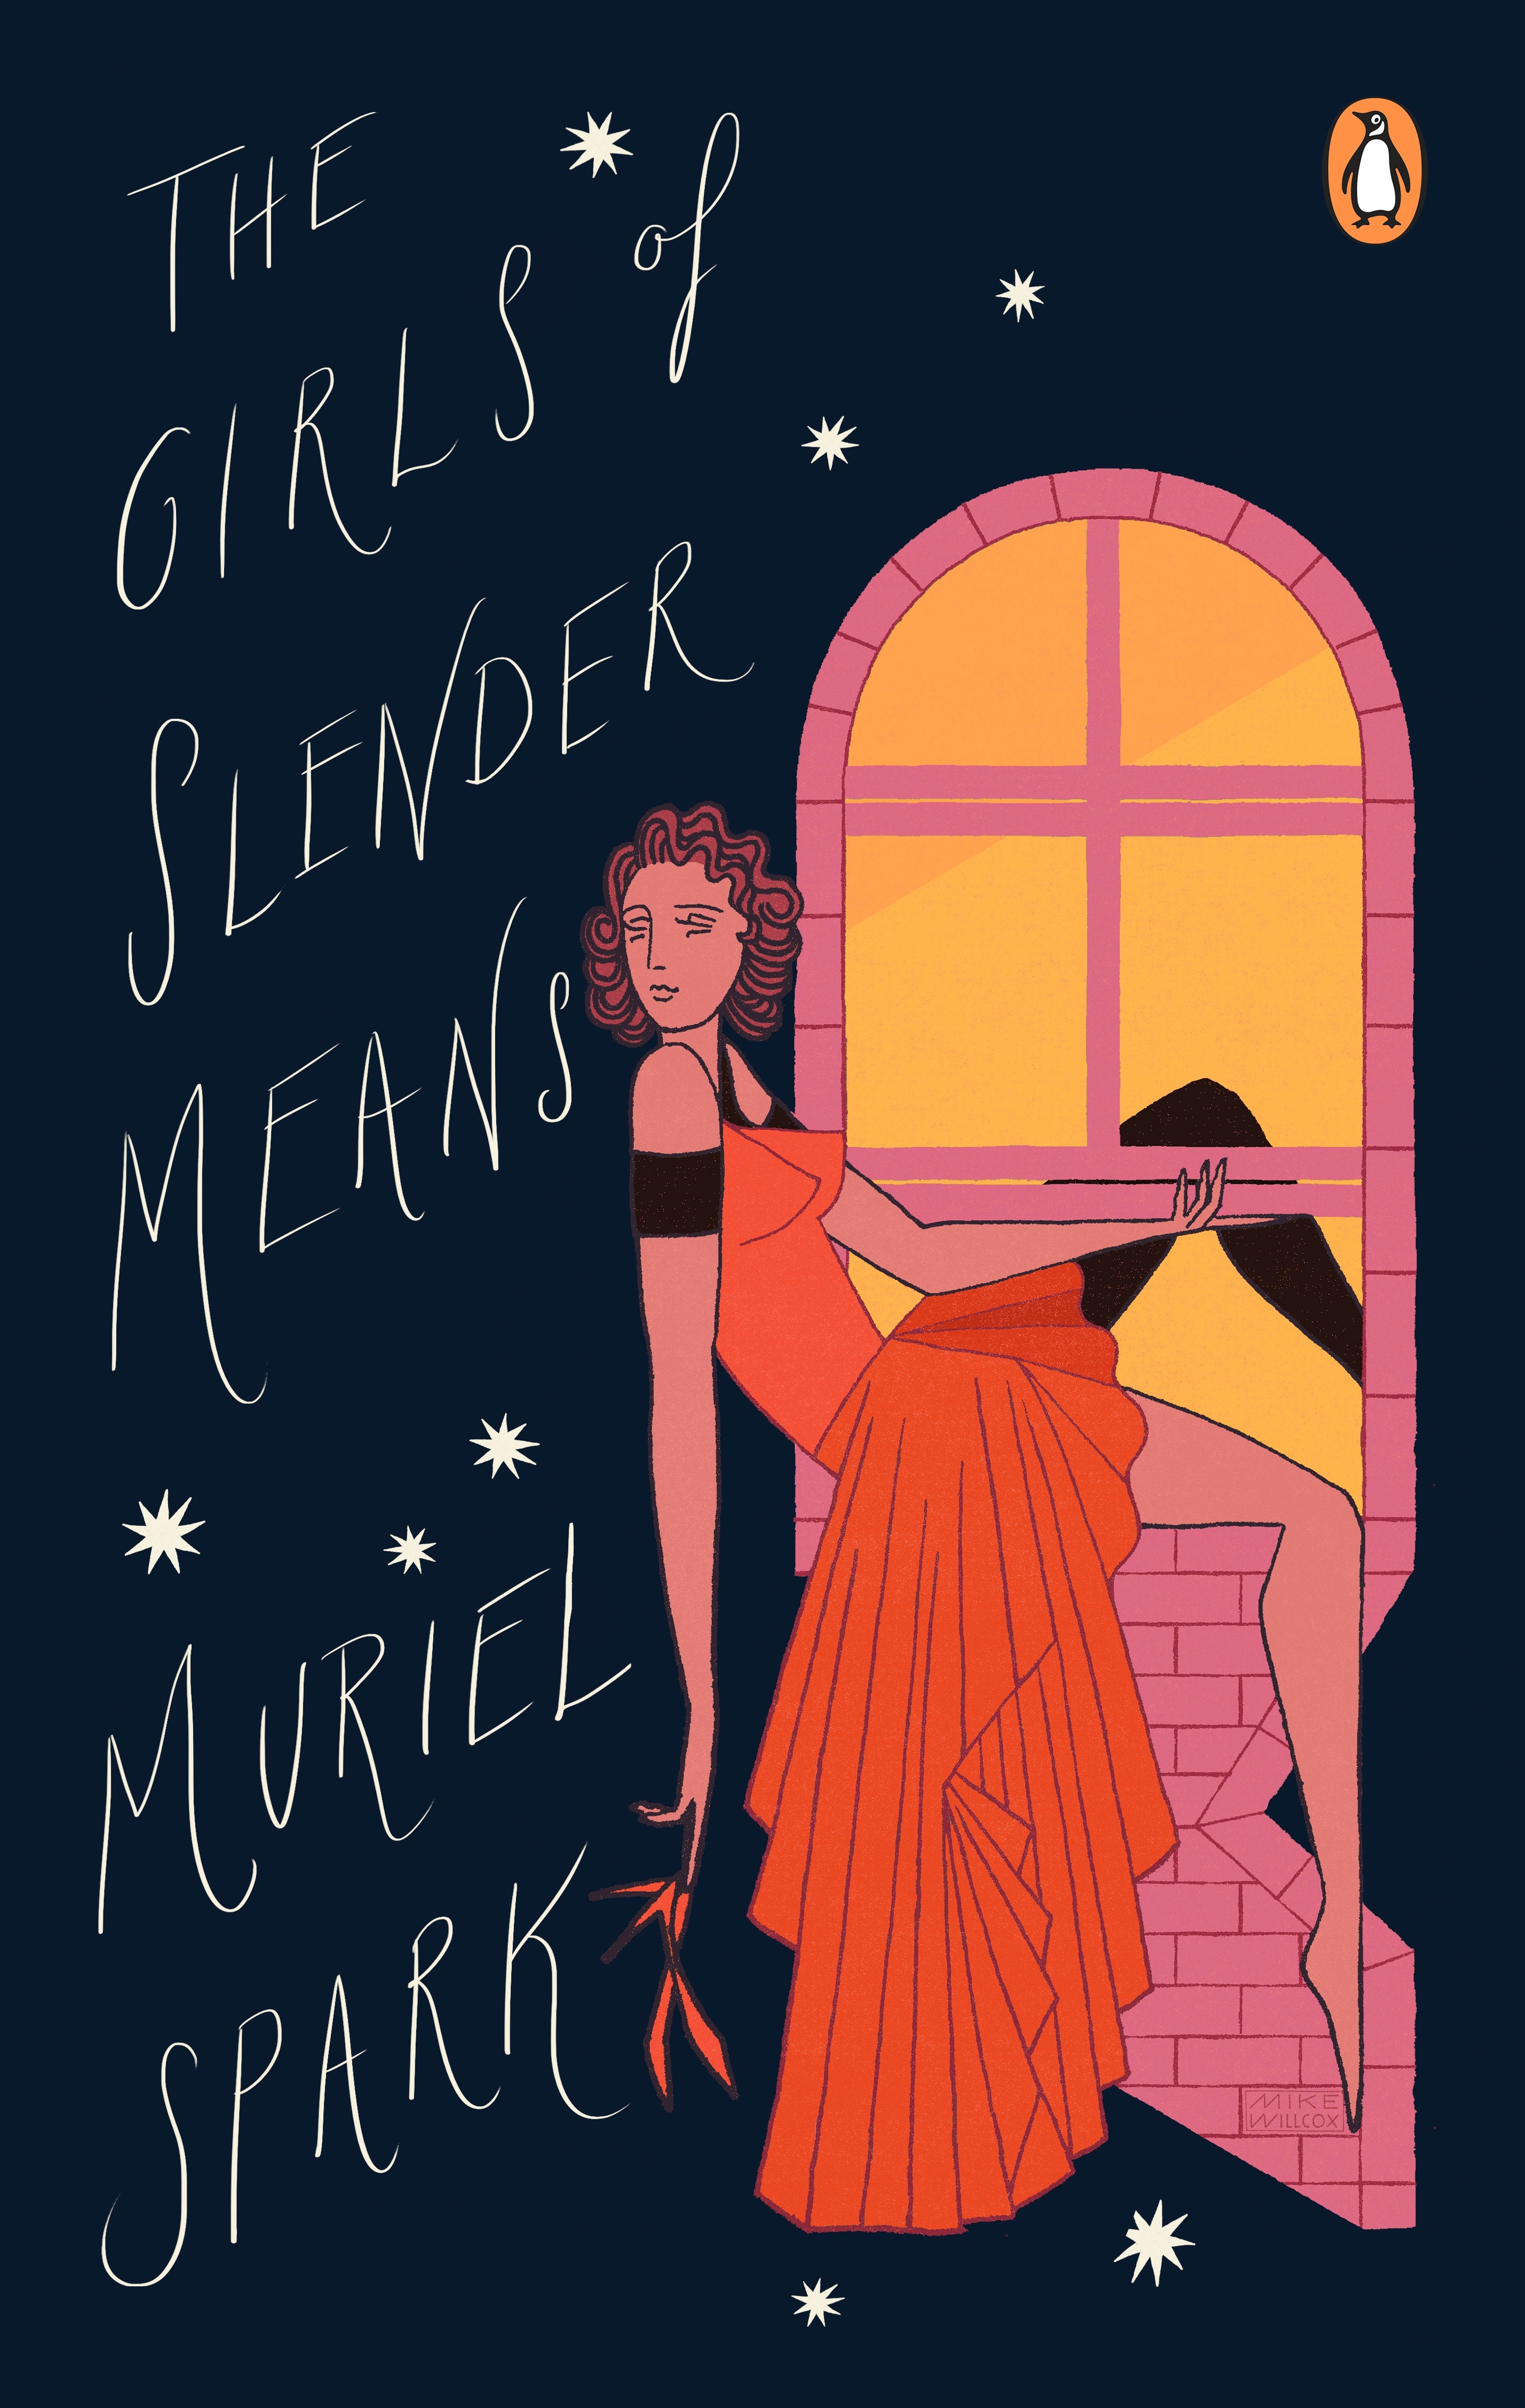 Book “The Girls Of Slender Means” by Muriel Spark — July 23, 2020